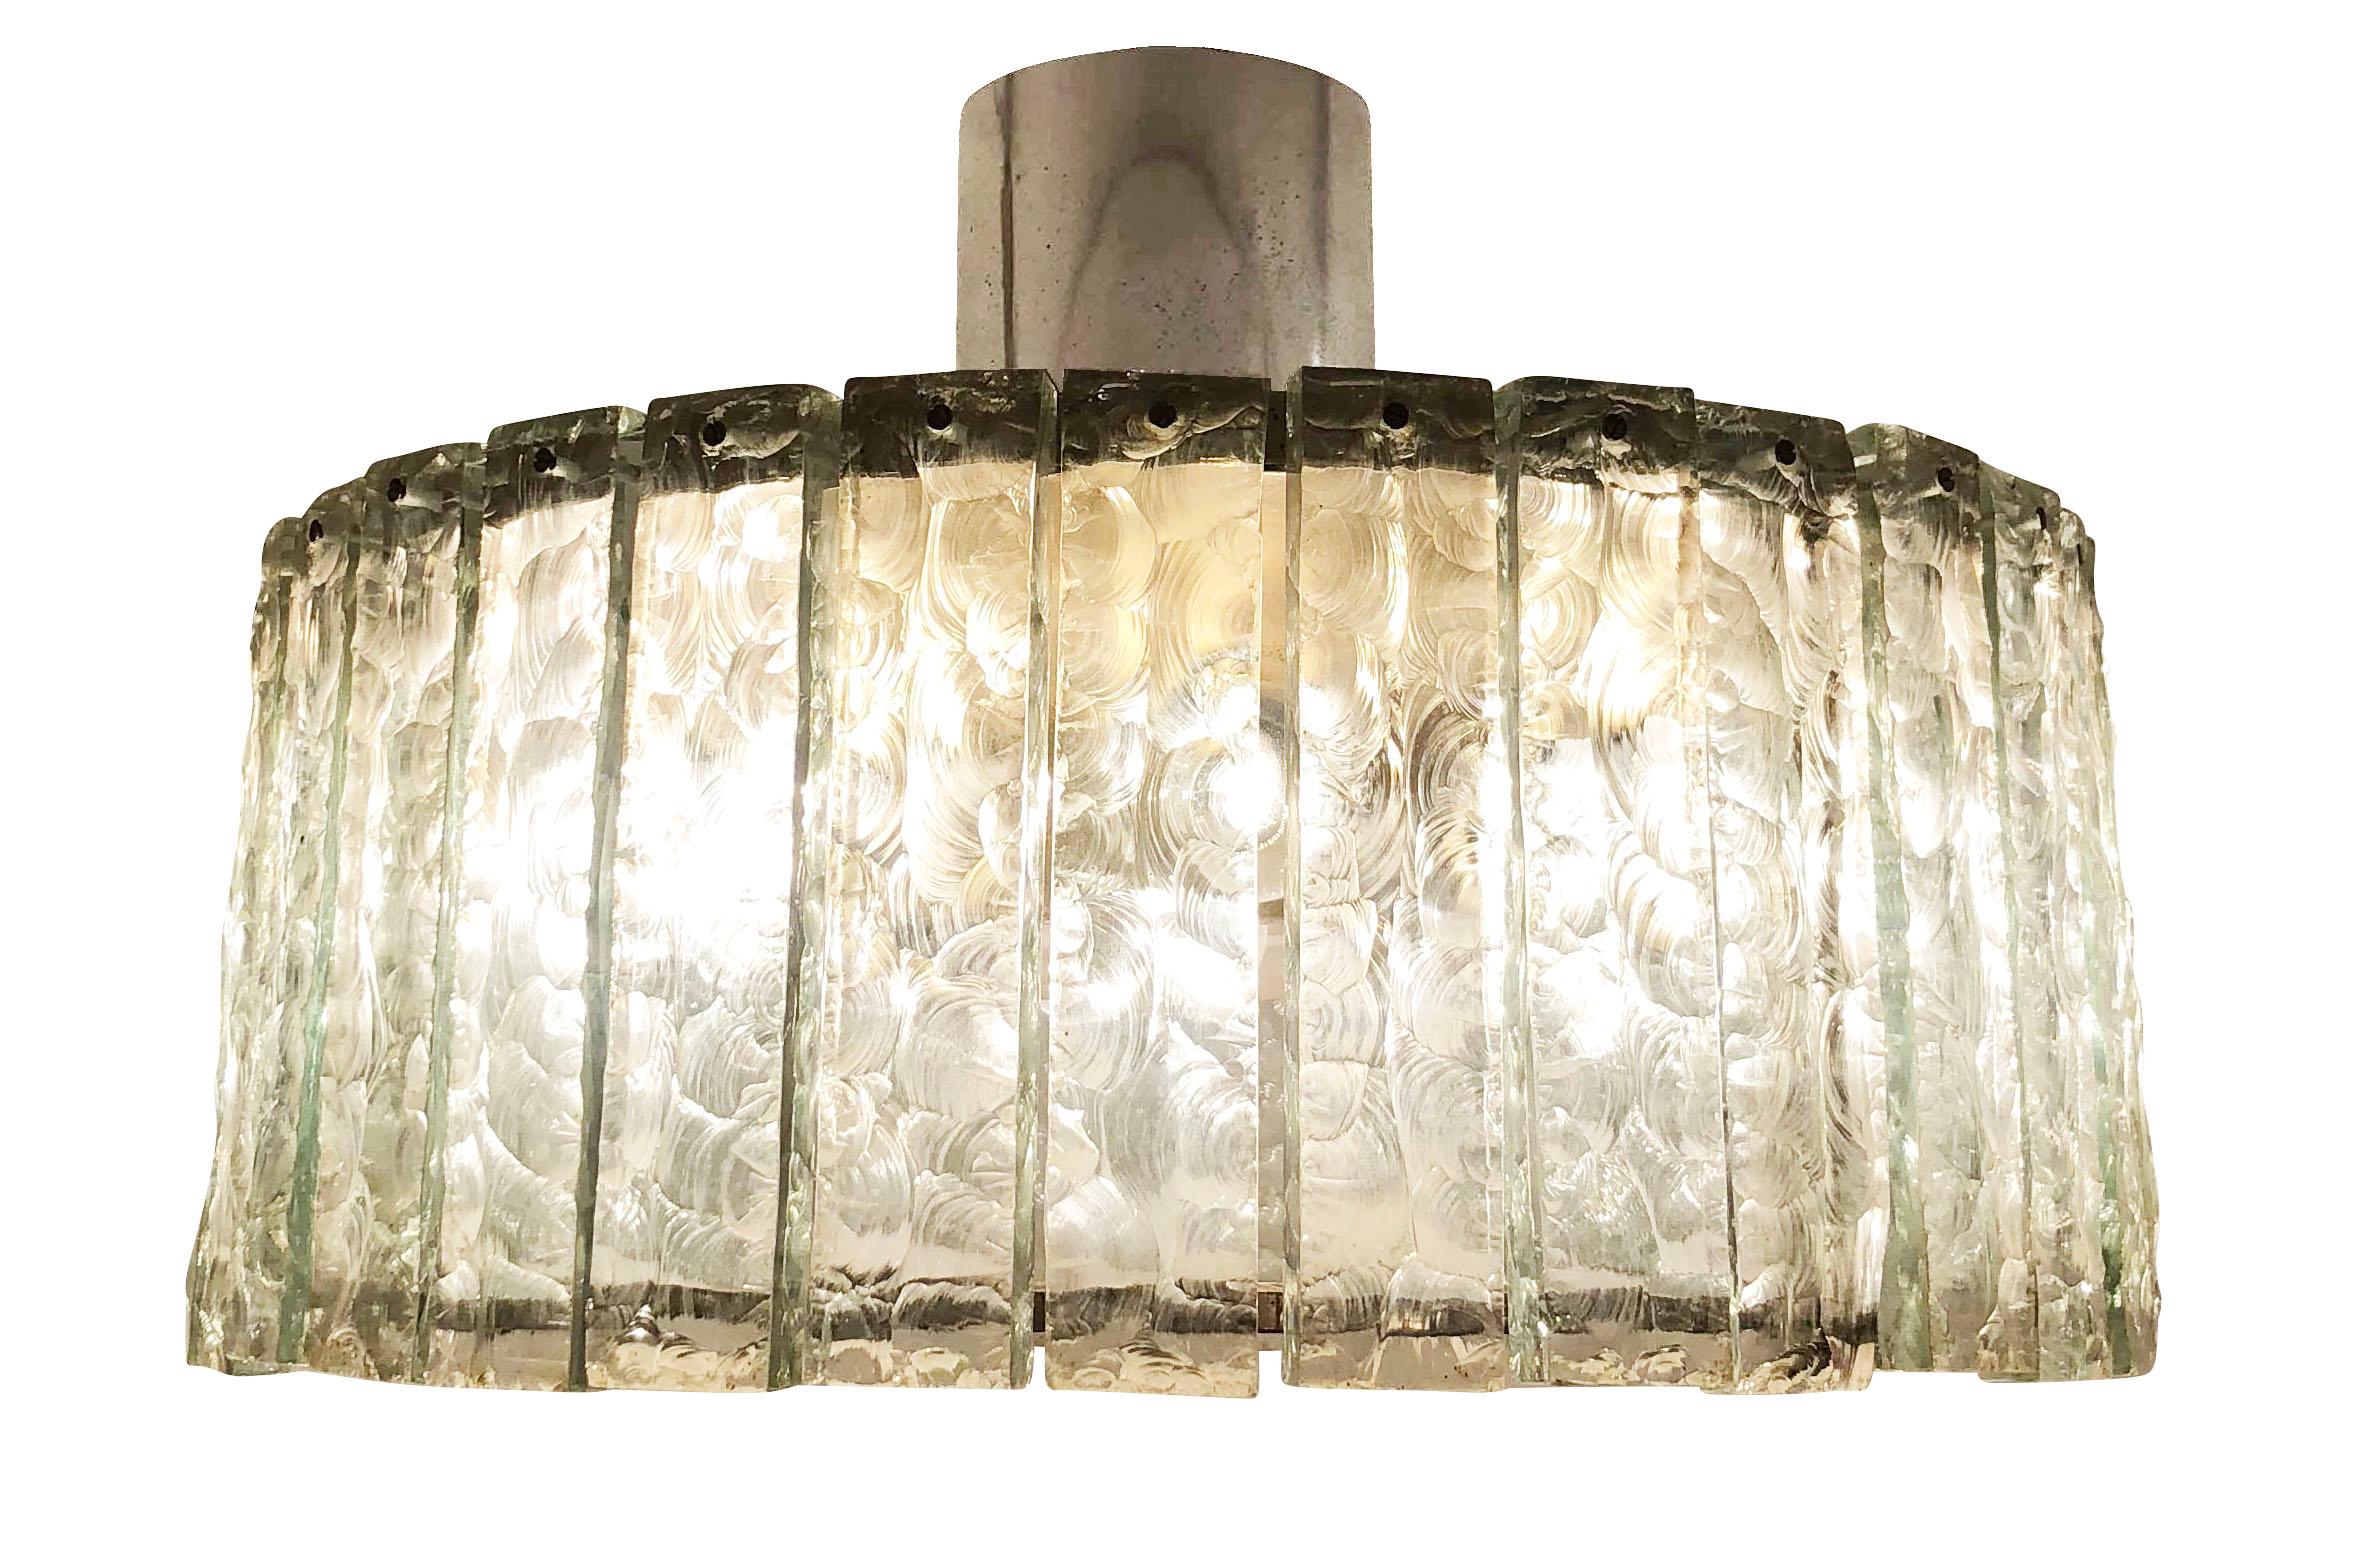 Fontana Arte ceiling light model 2448 designed by Max Ingrand in the 1960s. Features a nickel plated structure holding dozens of chiseled glasses. Closed at the bottom by a frosted glass diffuser. Holds eight candelabra sockets and one Edison